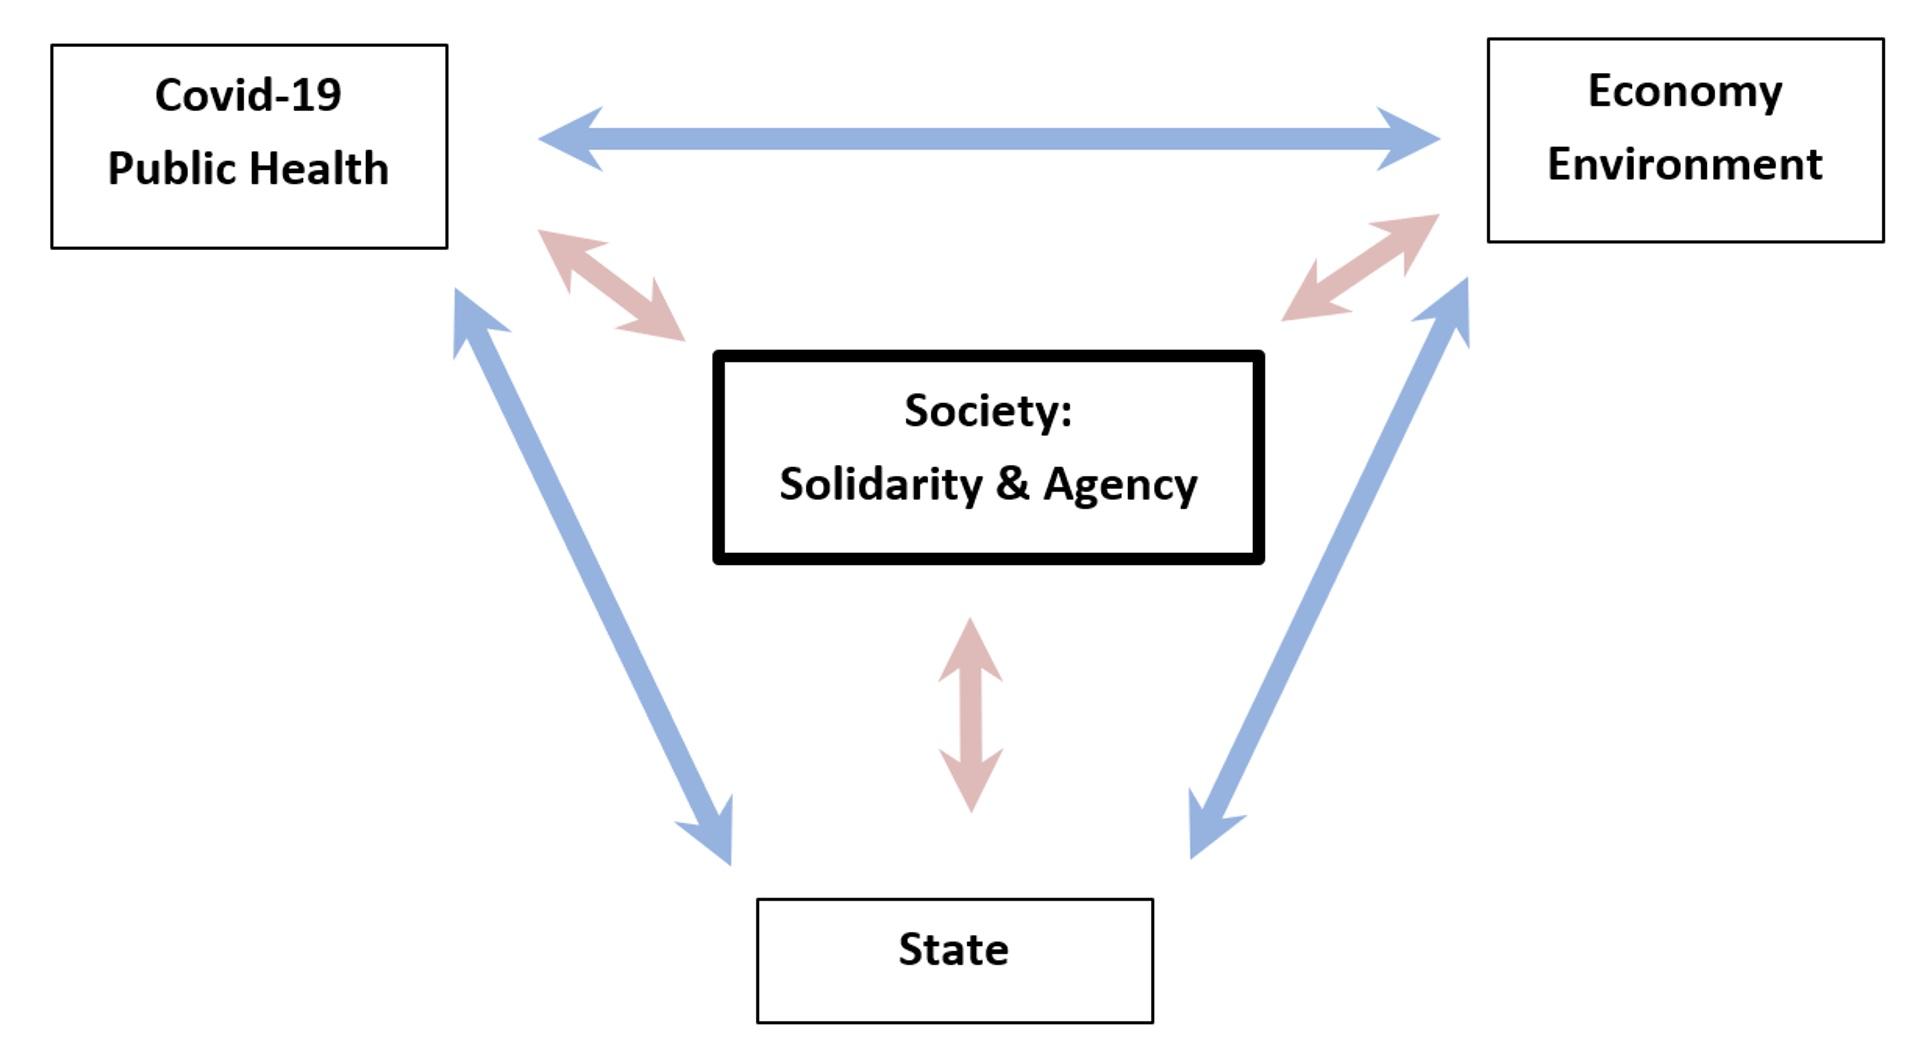 The roles of the state and society in dealing with the health and economic crises from the pandemic